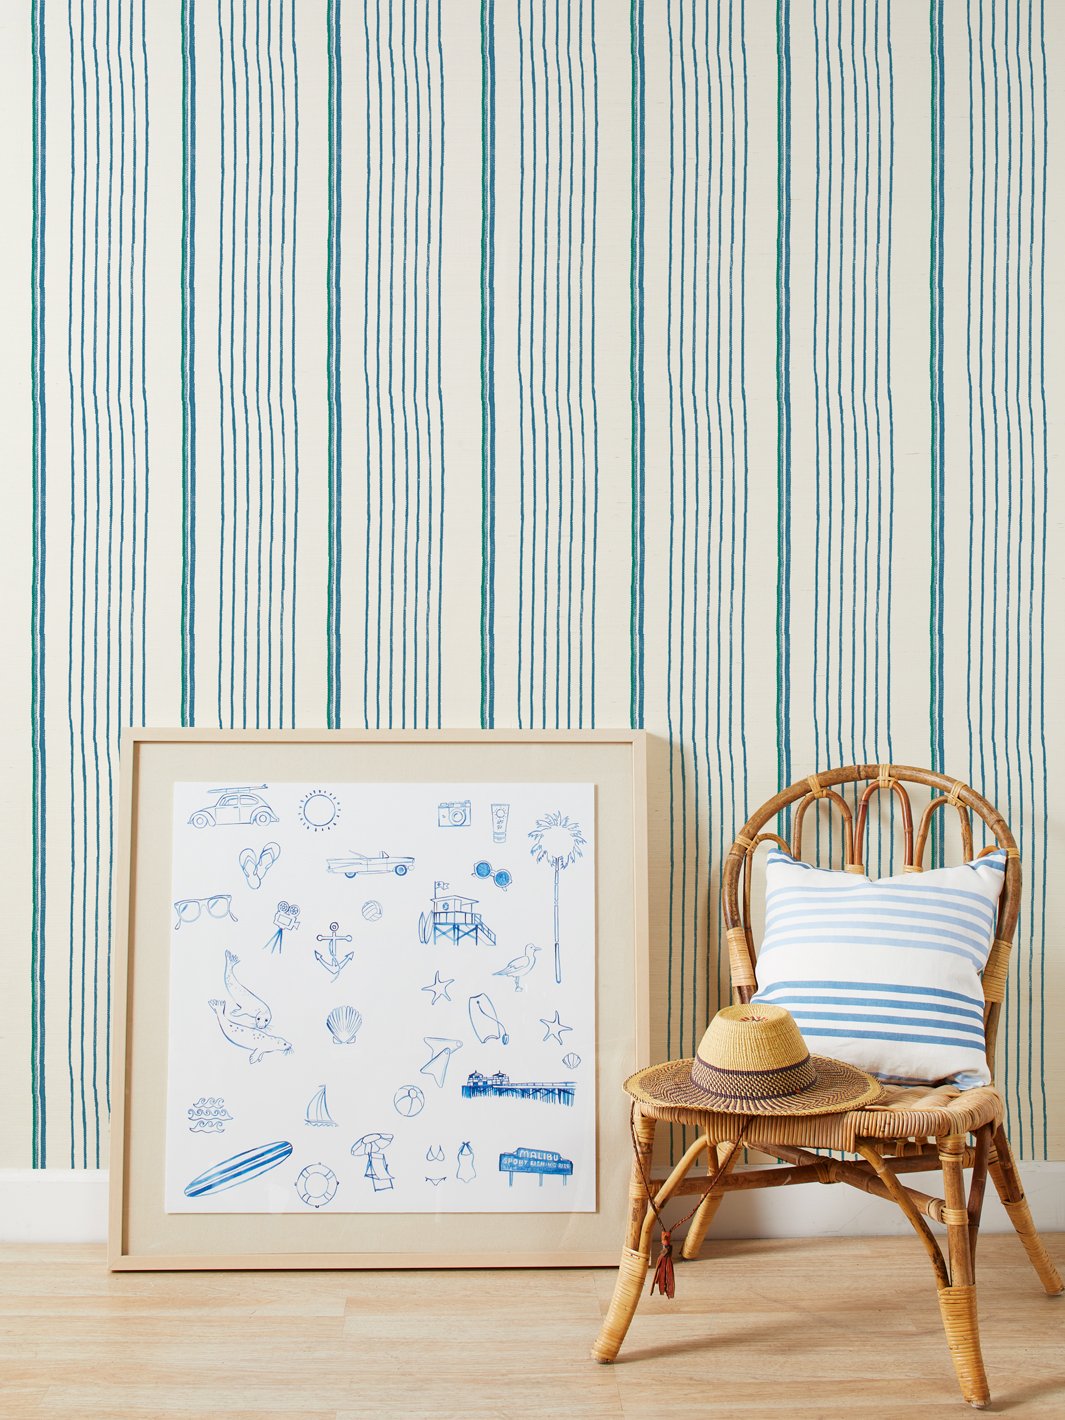 Considering Grasscloth? Here's What to Know - Northshore Magazine